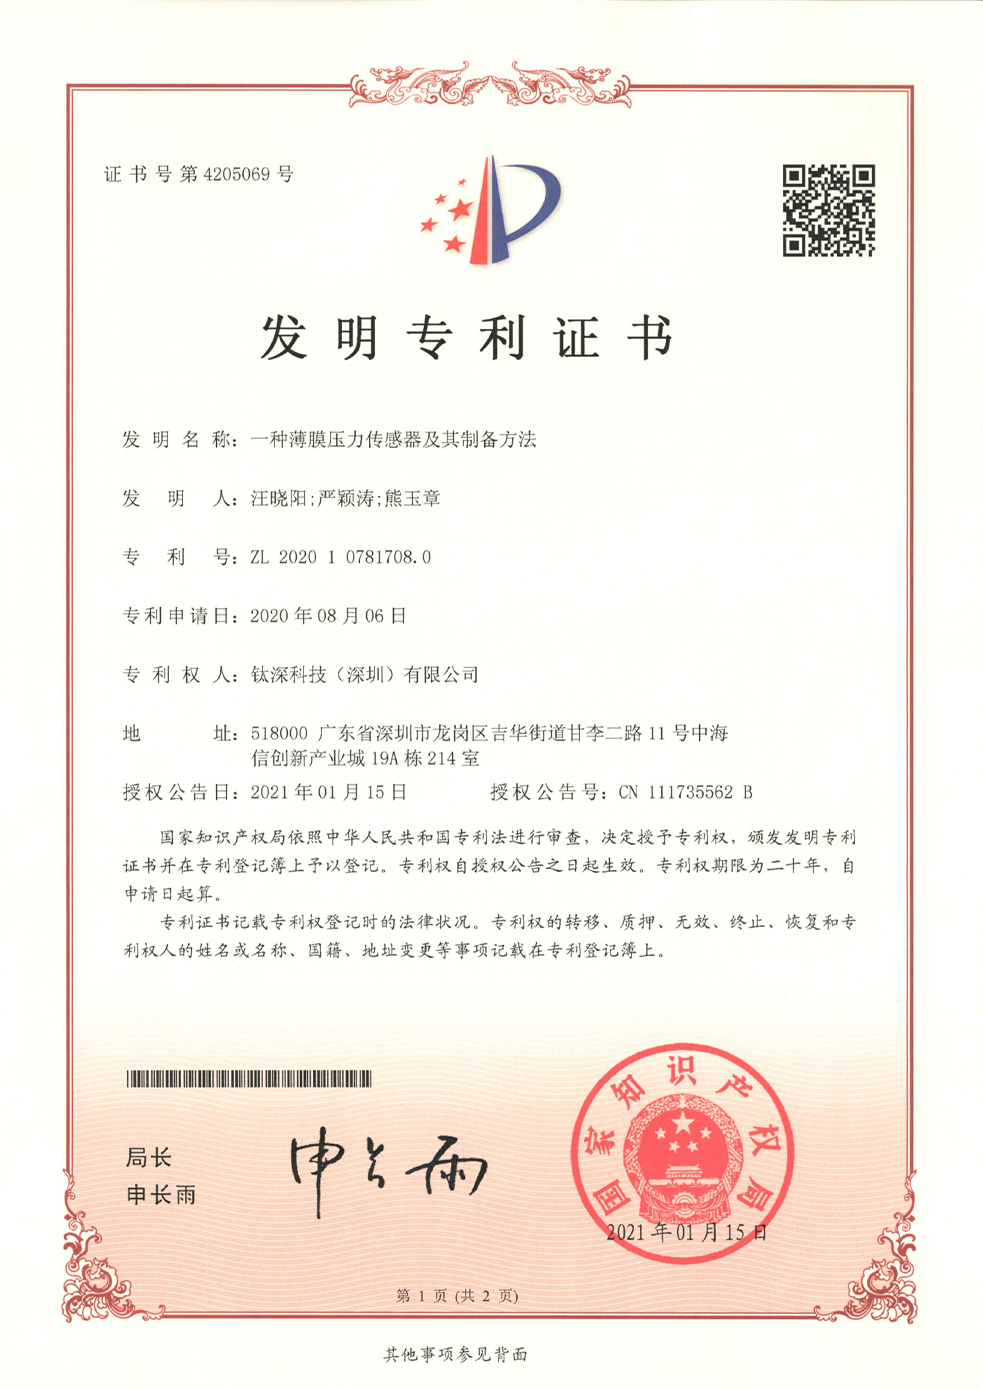  Invention patent certificate (a thin film pressure sensor and its preparation method)